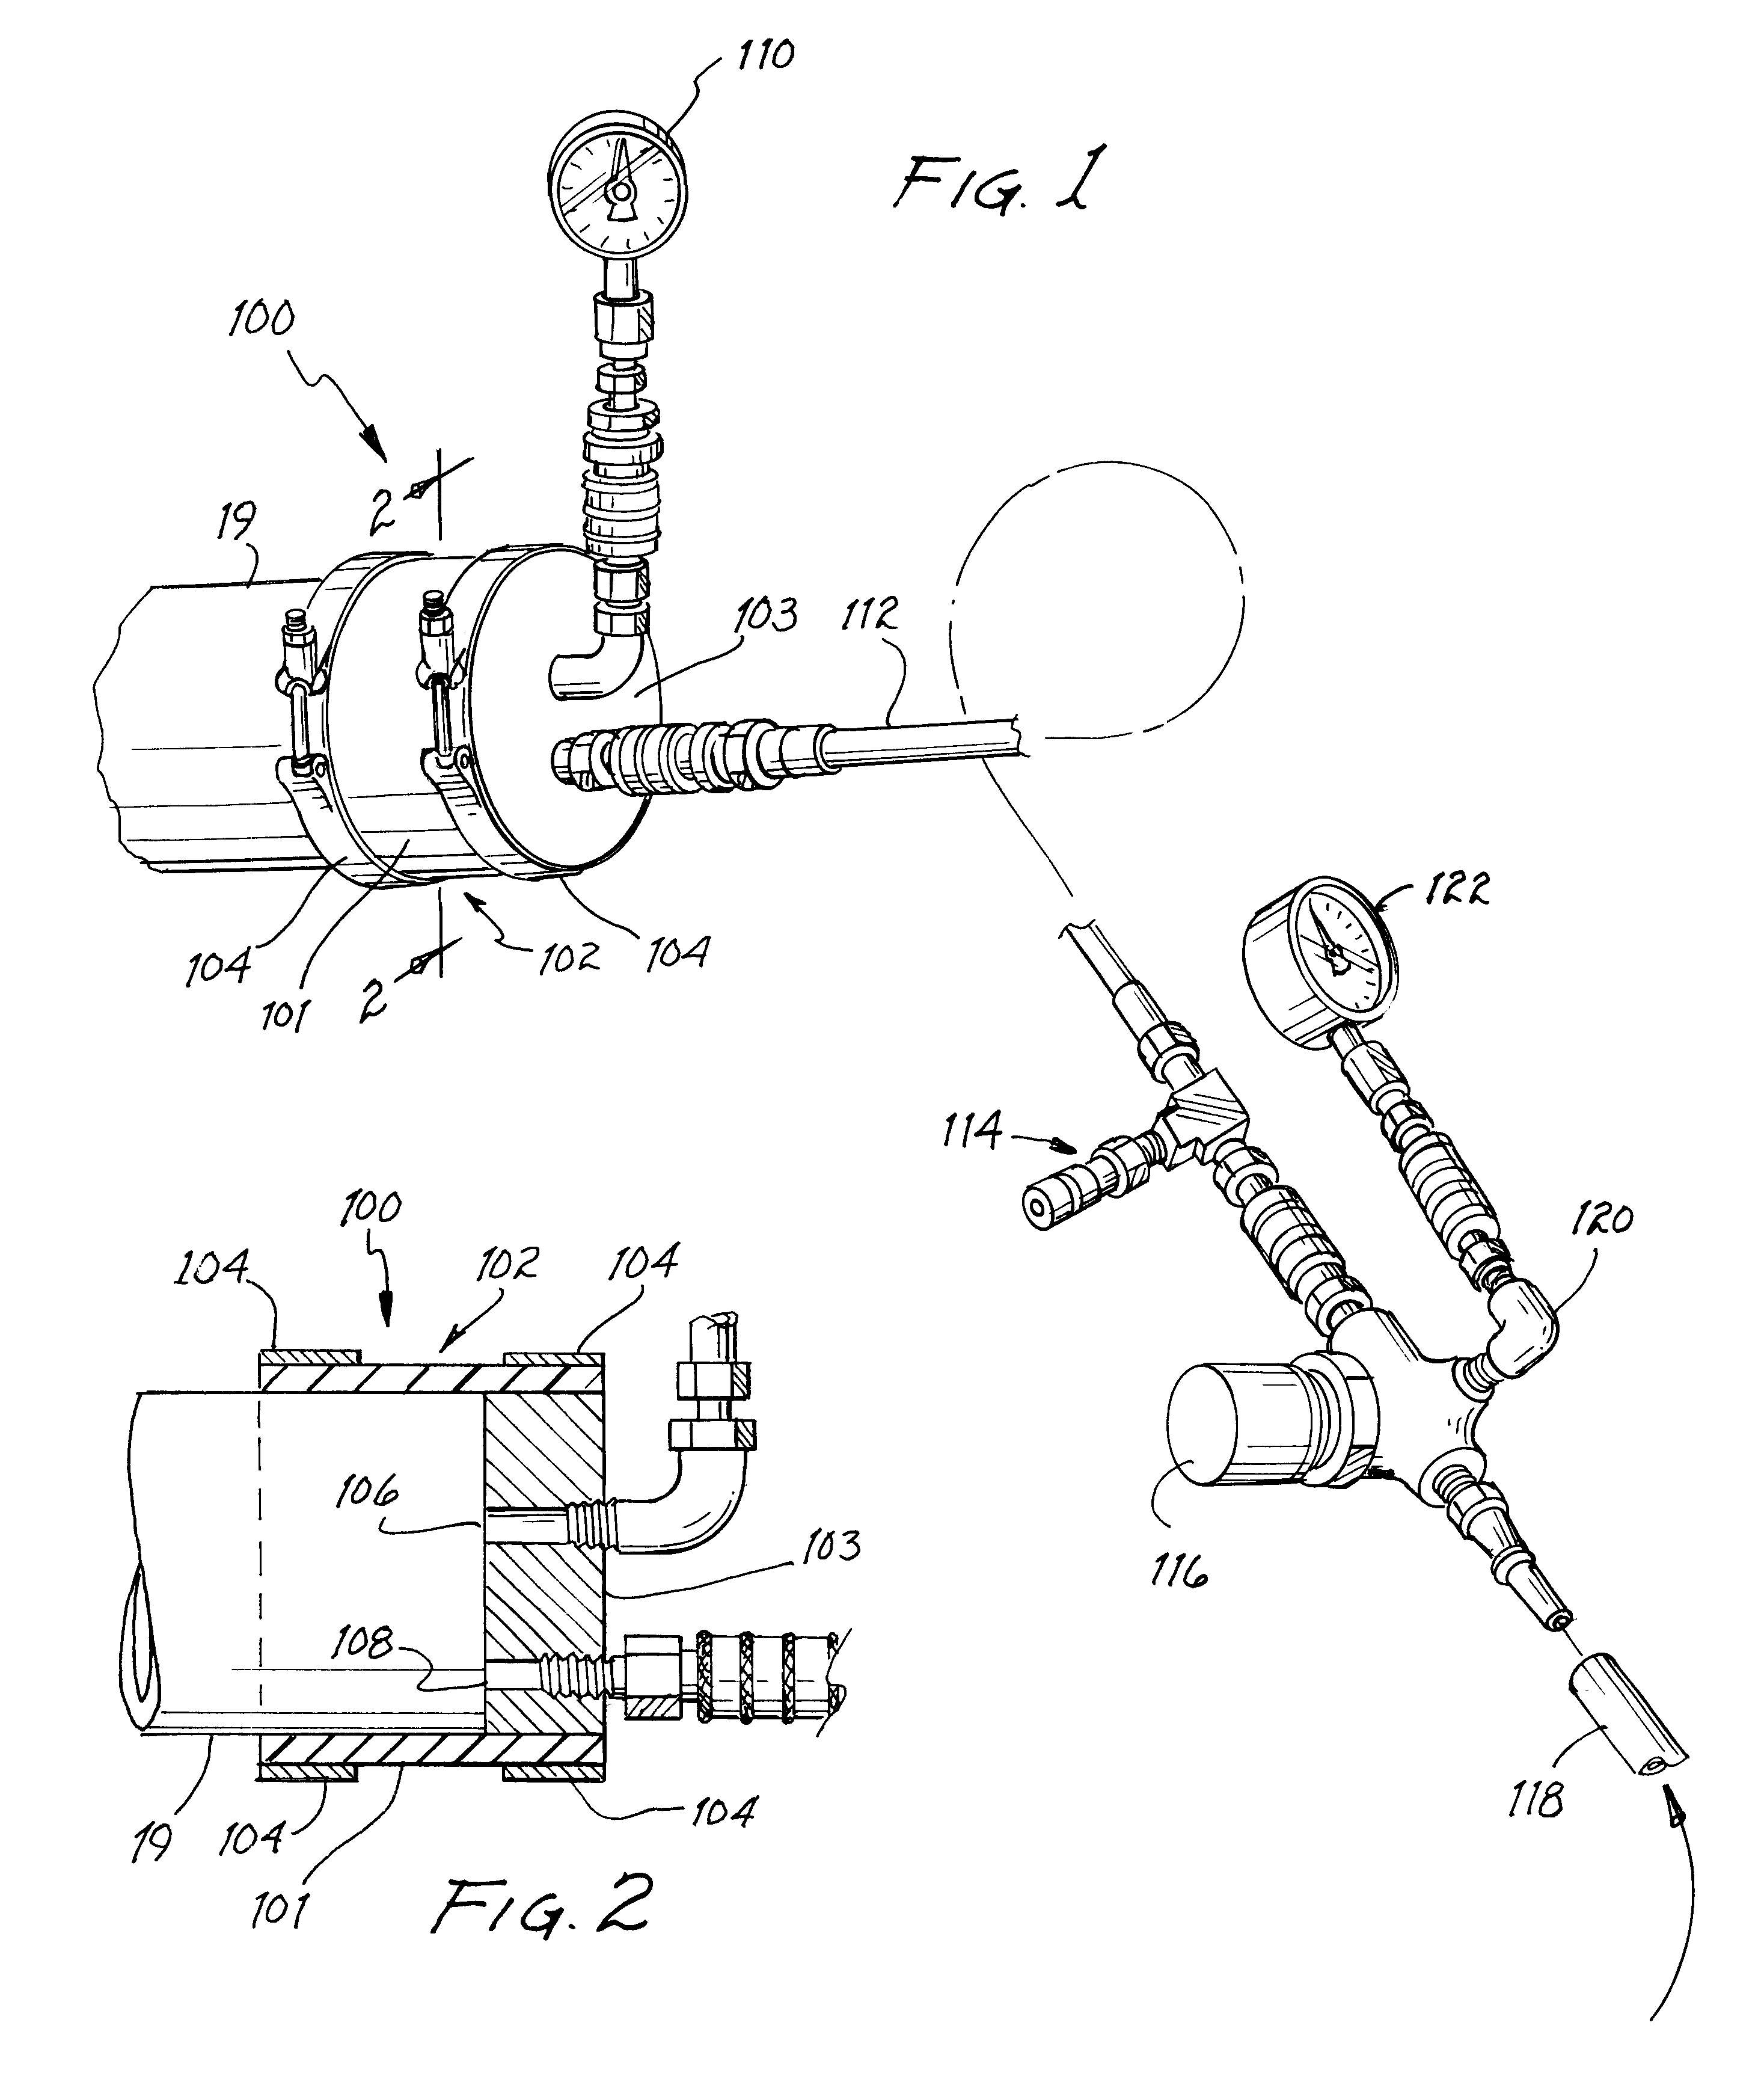 Apparatus and method for diagnosing pressure-related problems in turbocharged engines